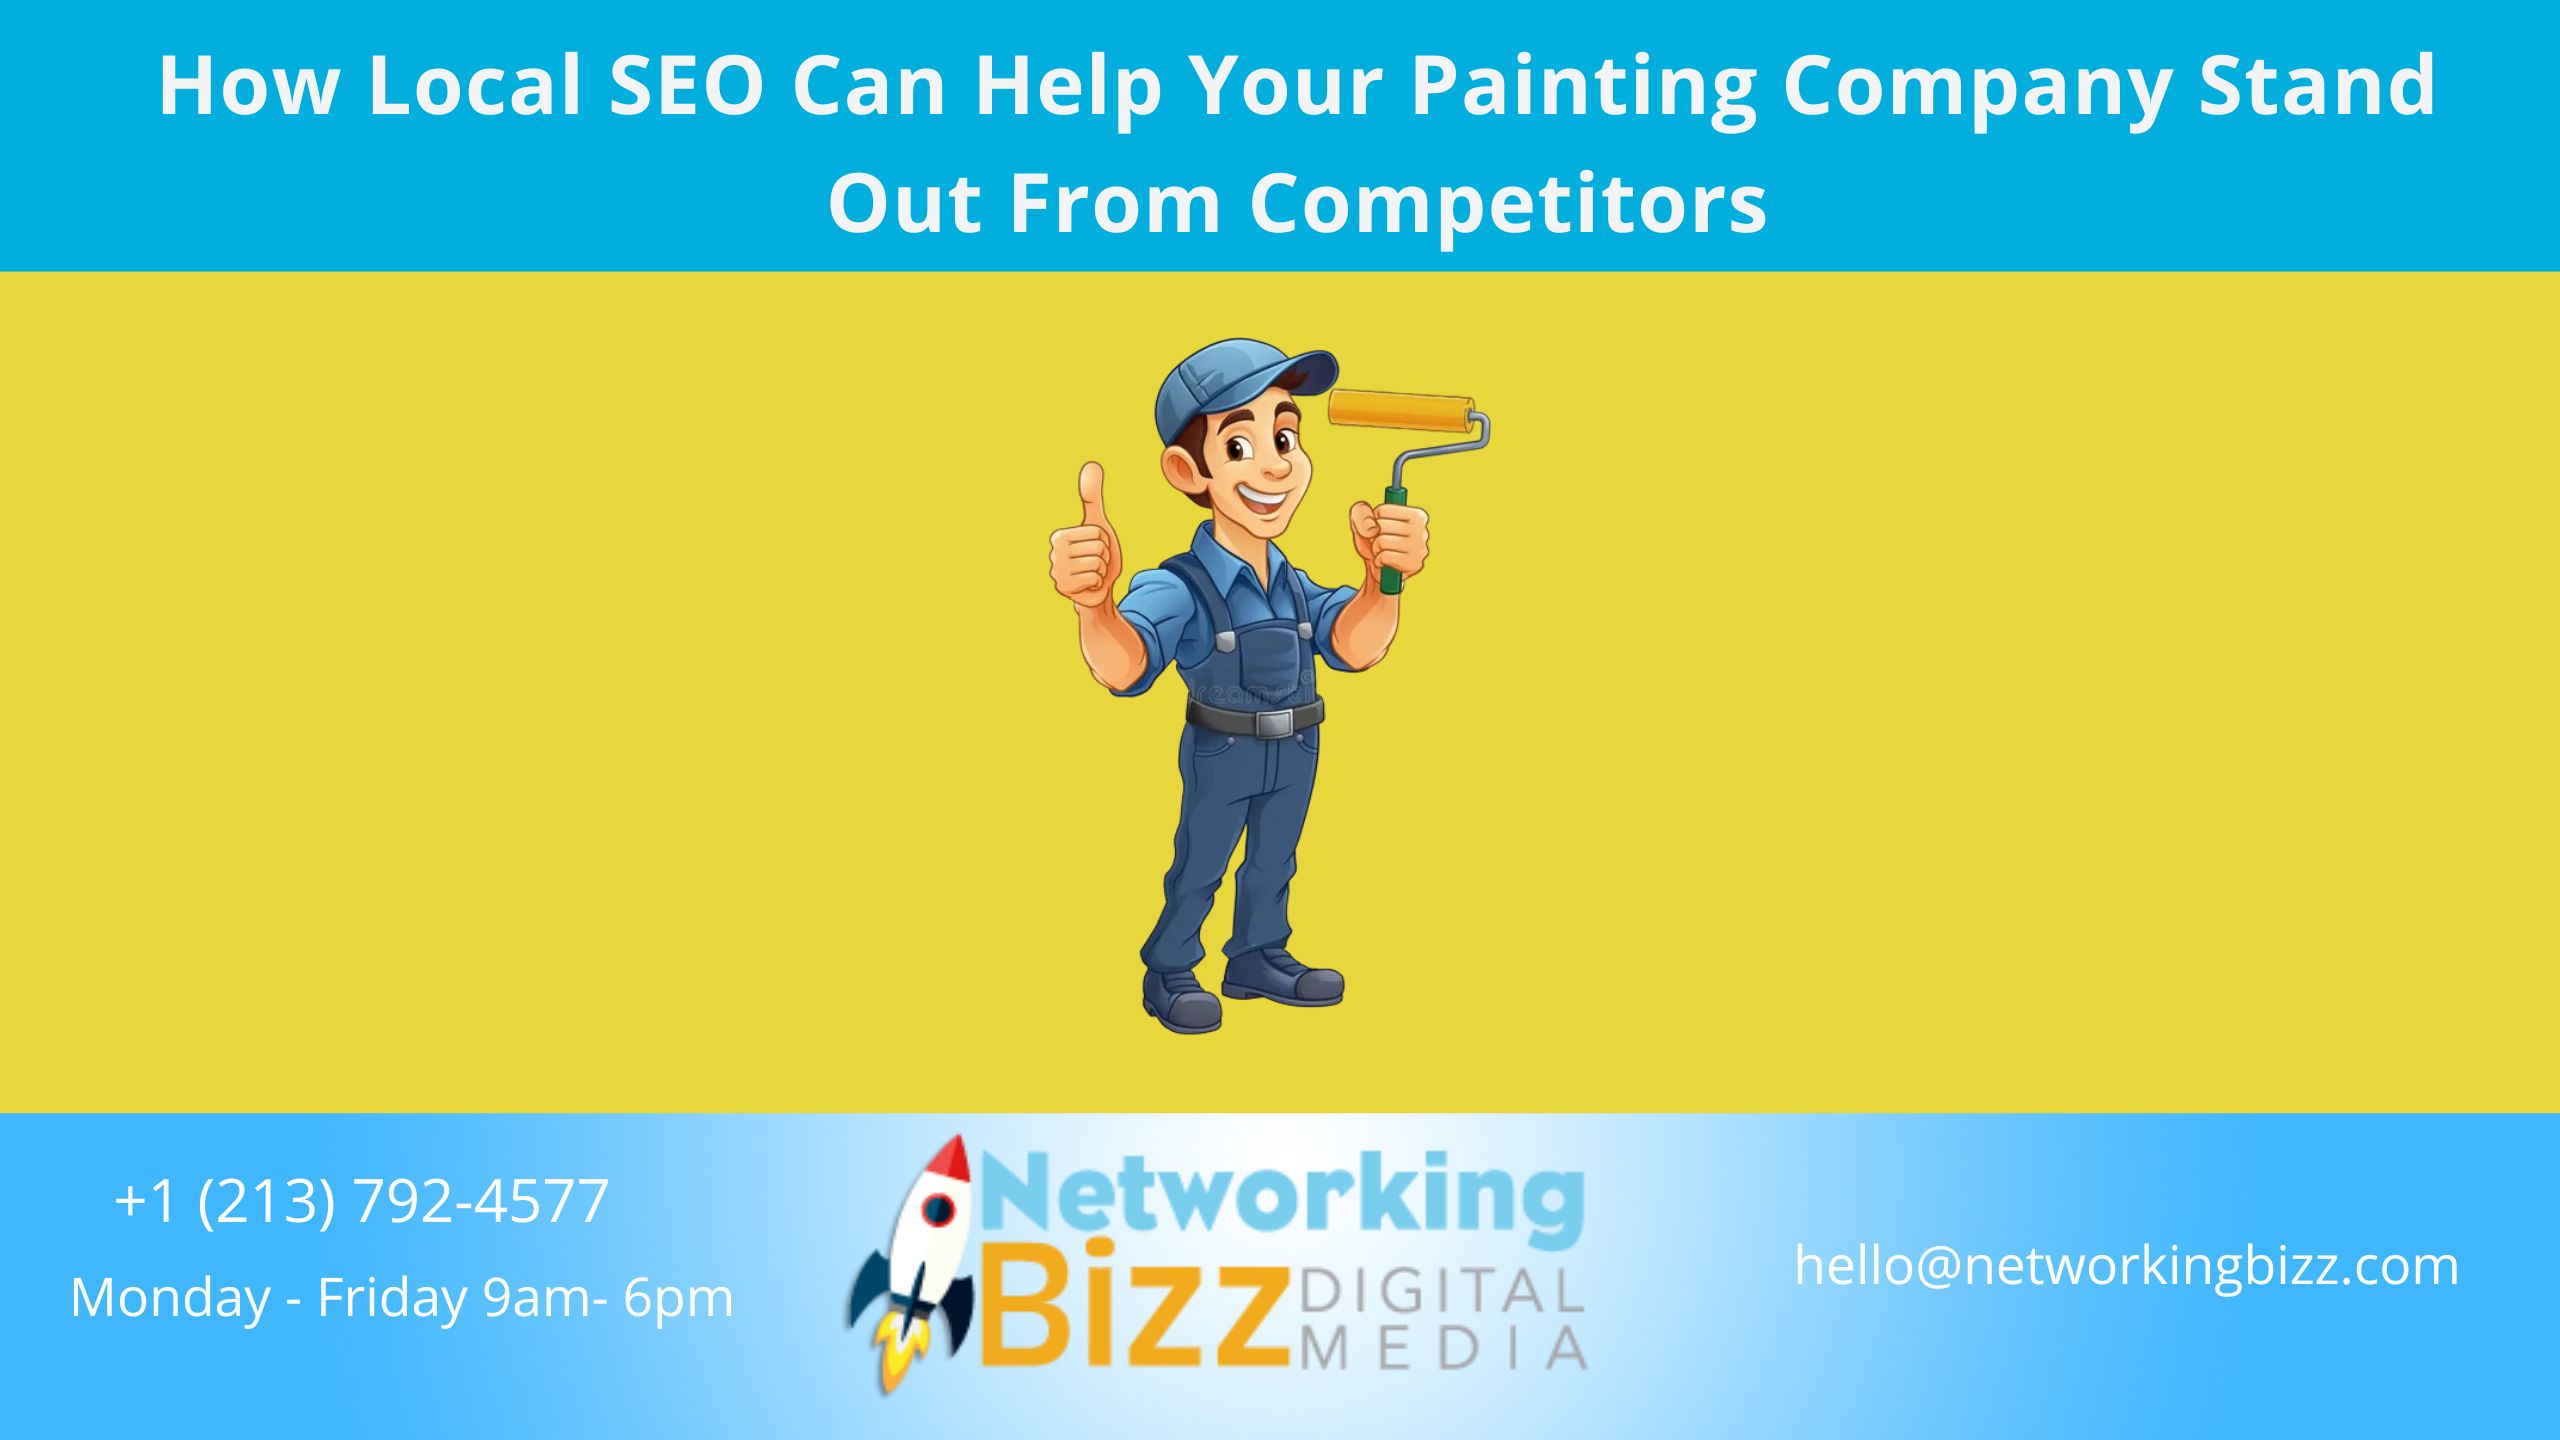 How Local SEO Can Help Your Painting Company Stand Out From Competitors